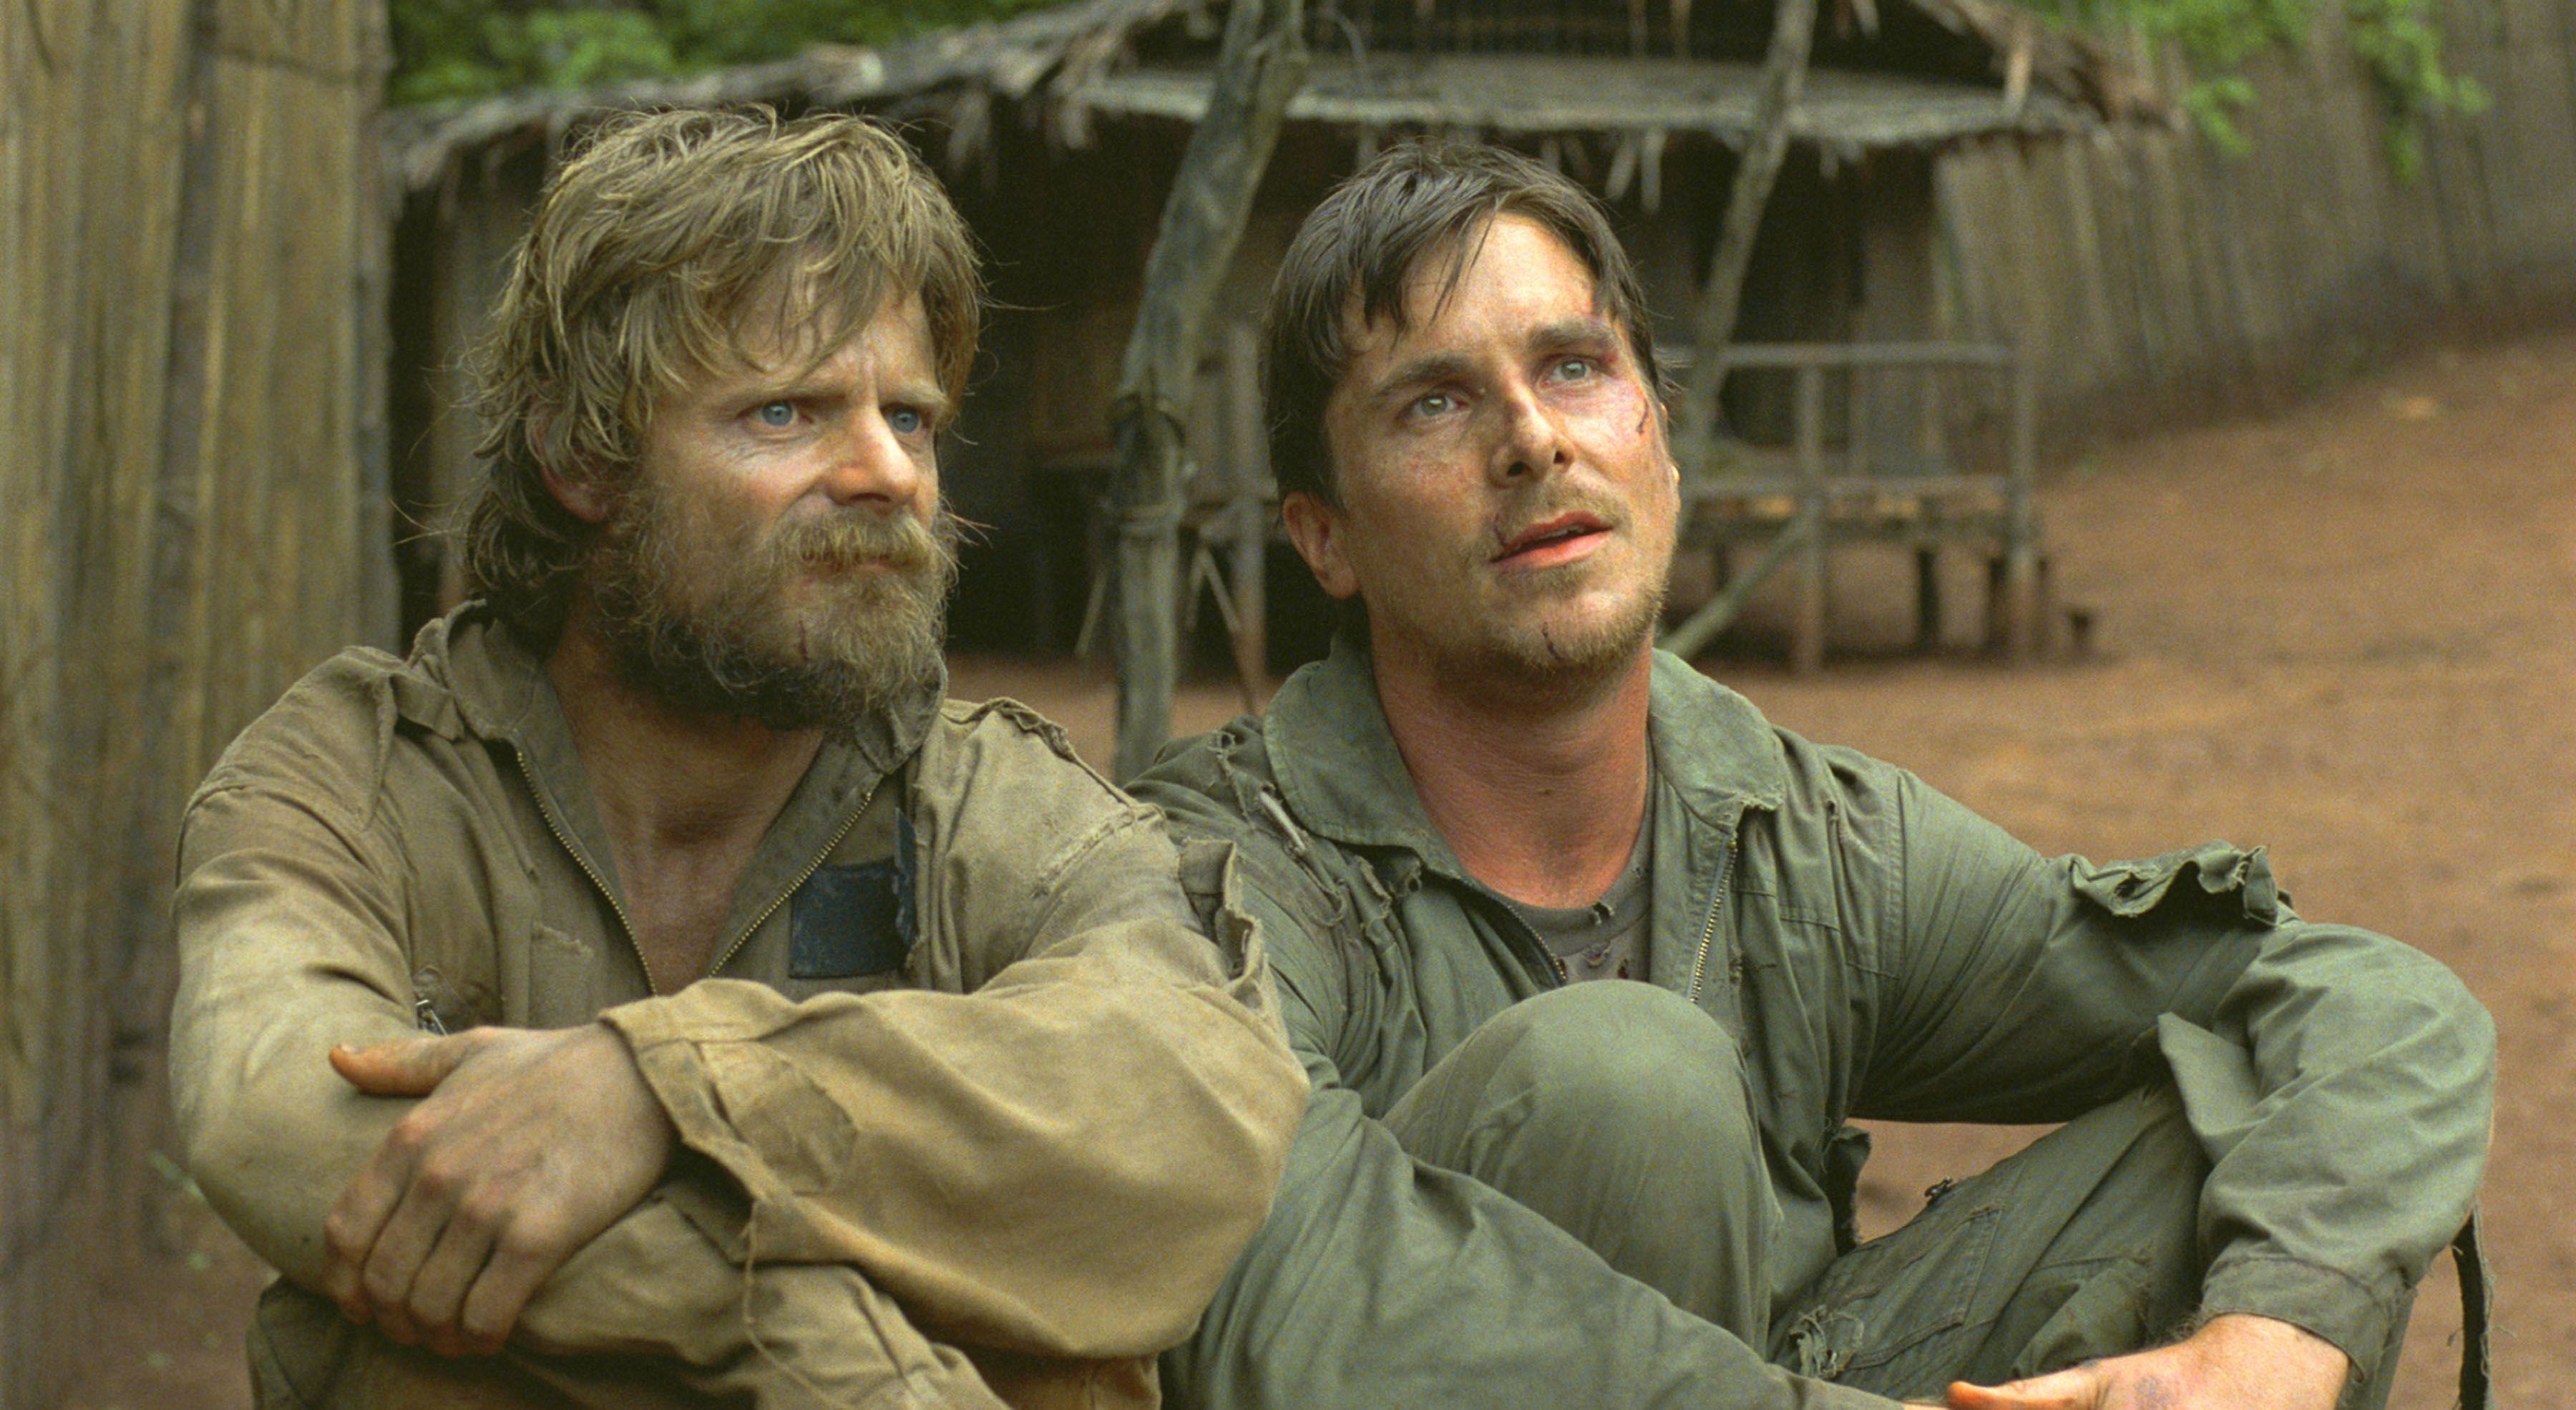 Christian Bale and Steve Zahn sit in a prisoner-of-war camp in dirty ragged clothes